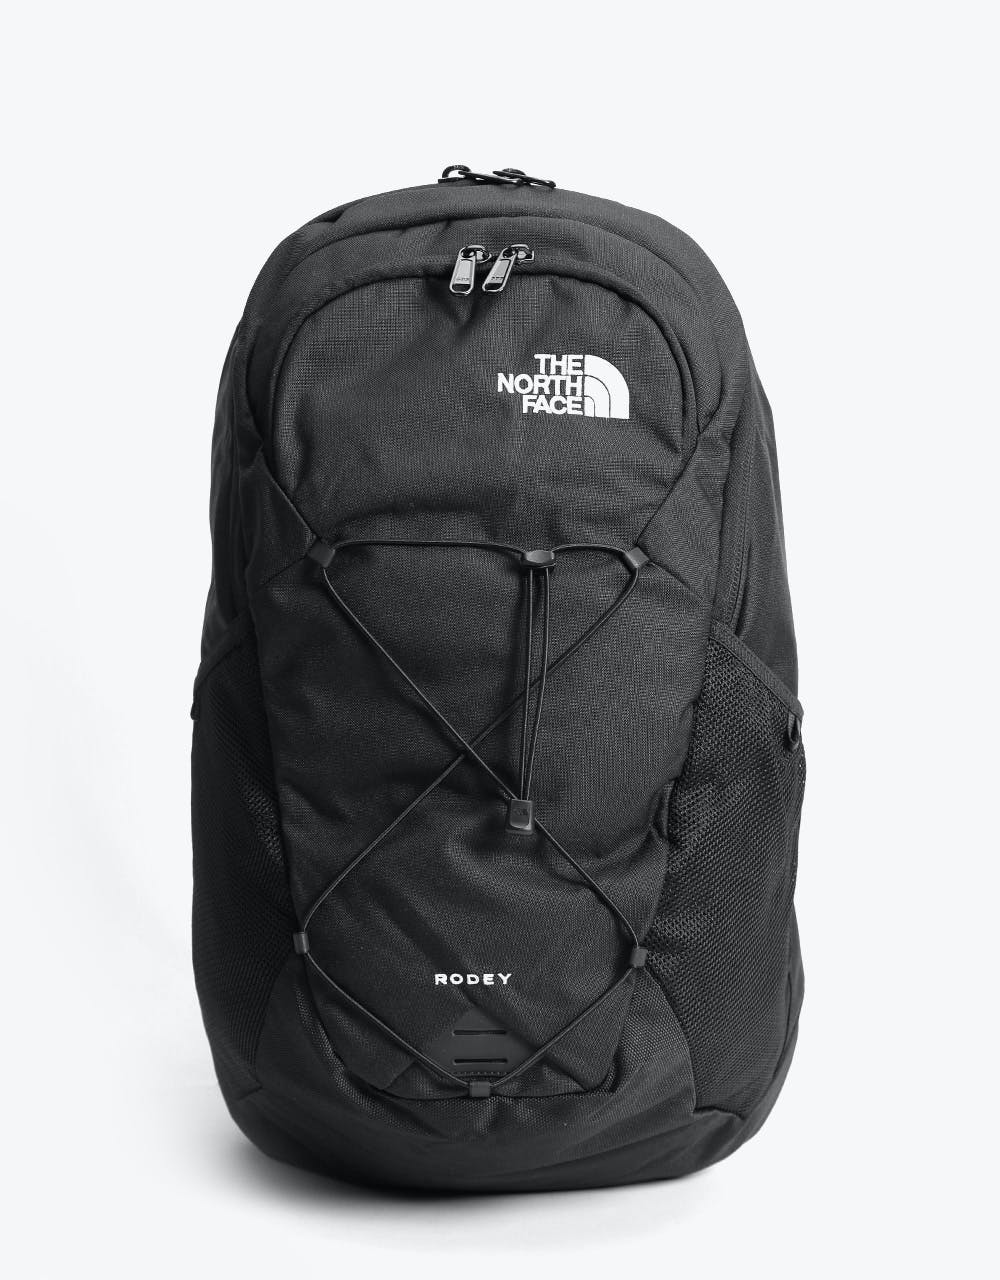 The North Face Rodey Backpack - TNF Black – Route One